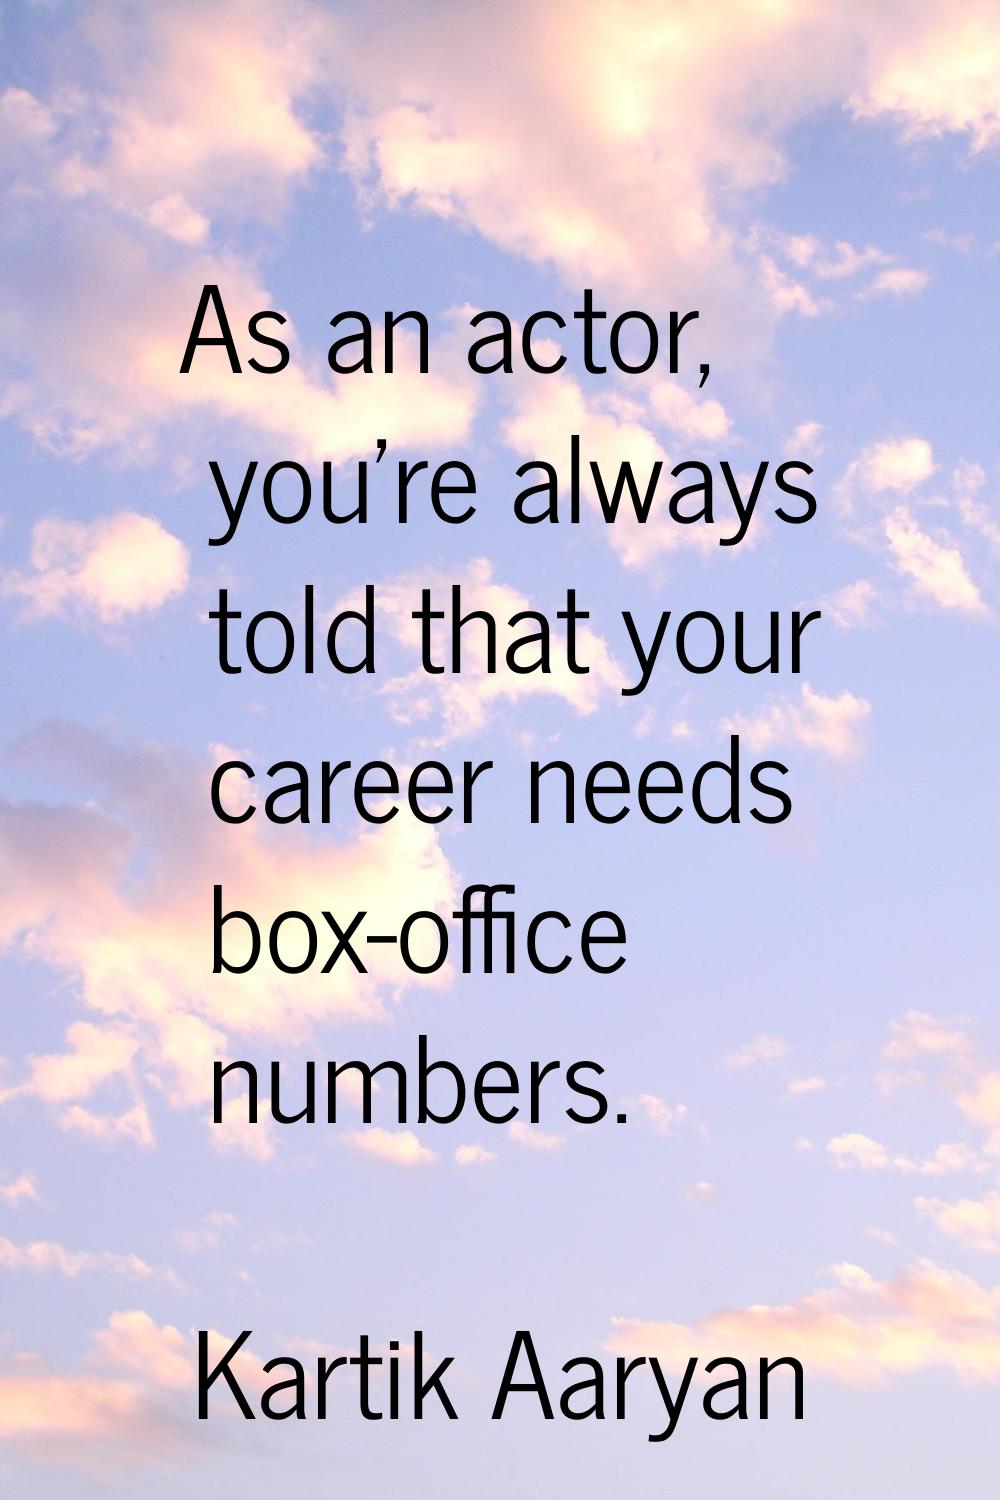 As an actor, you're always told that your career needs box-office numbers.